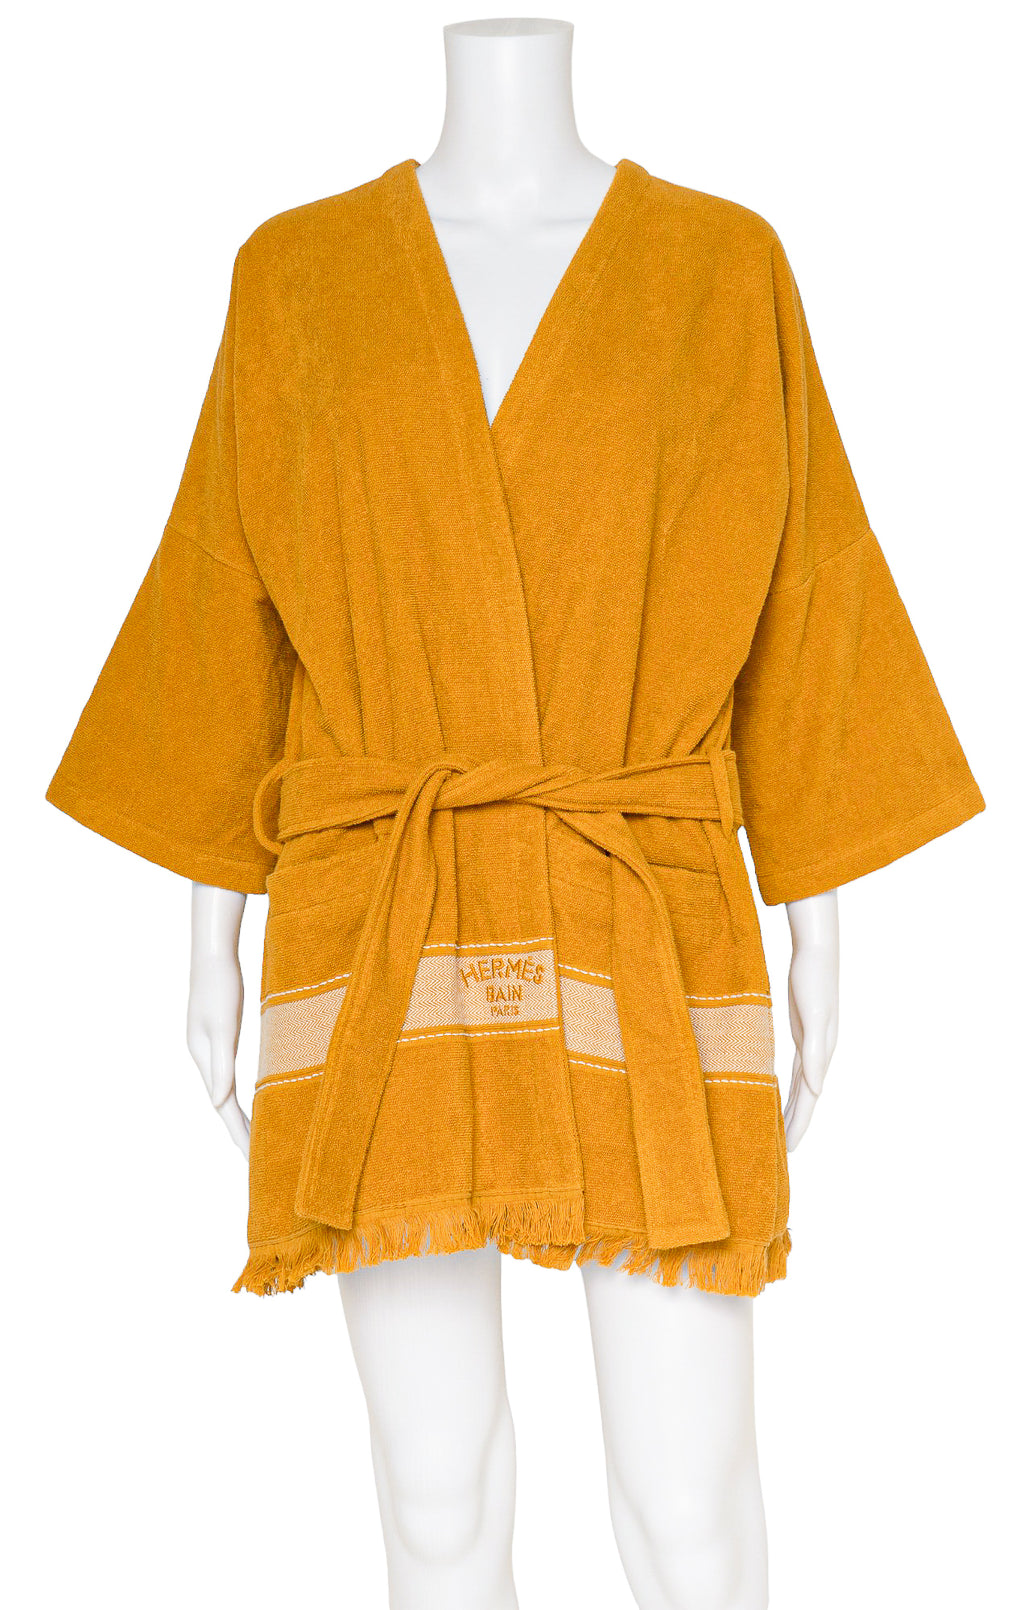 HERMÈS (RARE & NEW) with tags Robe Size: O/S